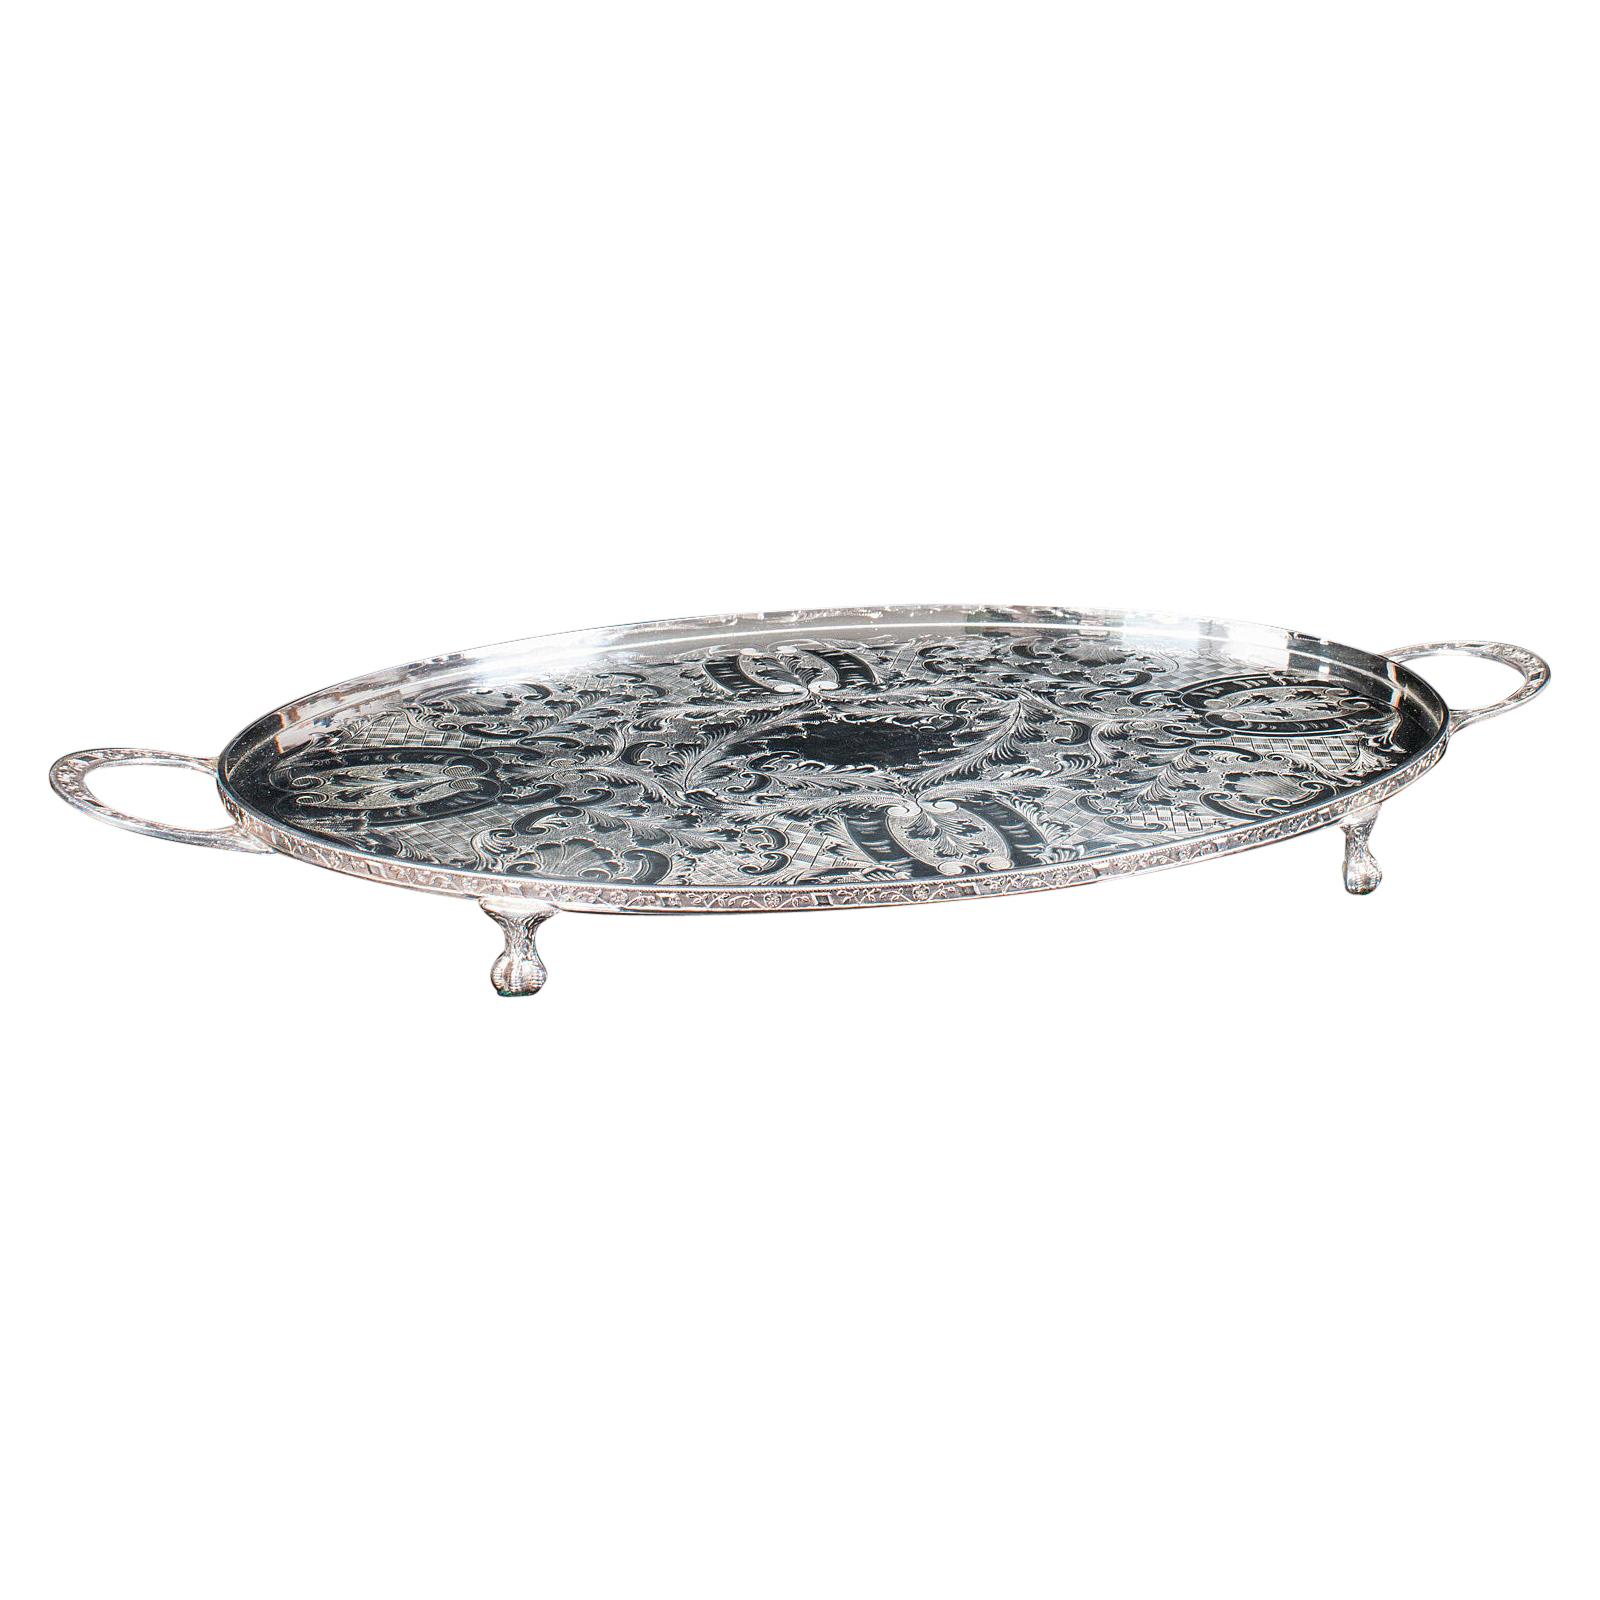 Vintage Oval Serving Tray, English, Silver Plate, Afternoon Tea, Viners, C.1950